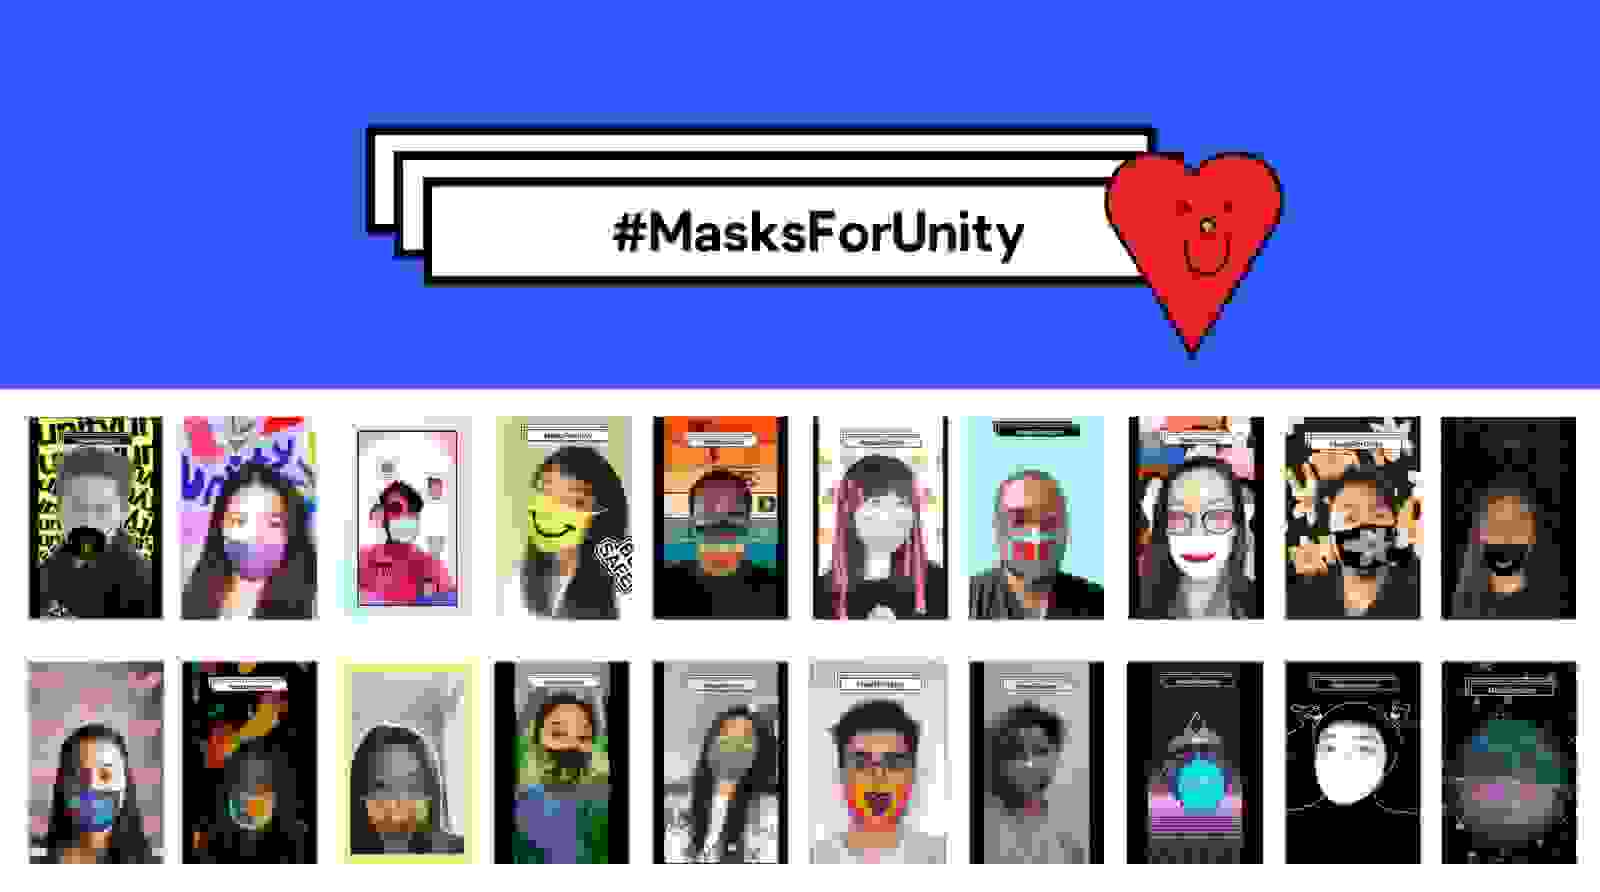 A graphic that reads "Masks for Unity" in the upper half. Underneath is a grid of individual selfies of people wearing AR face masks